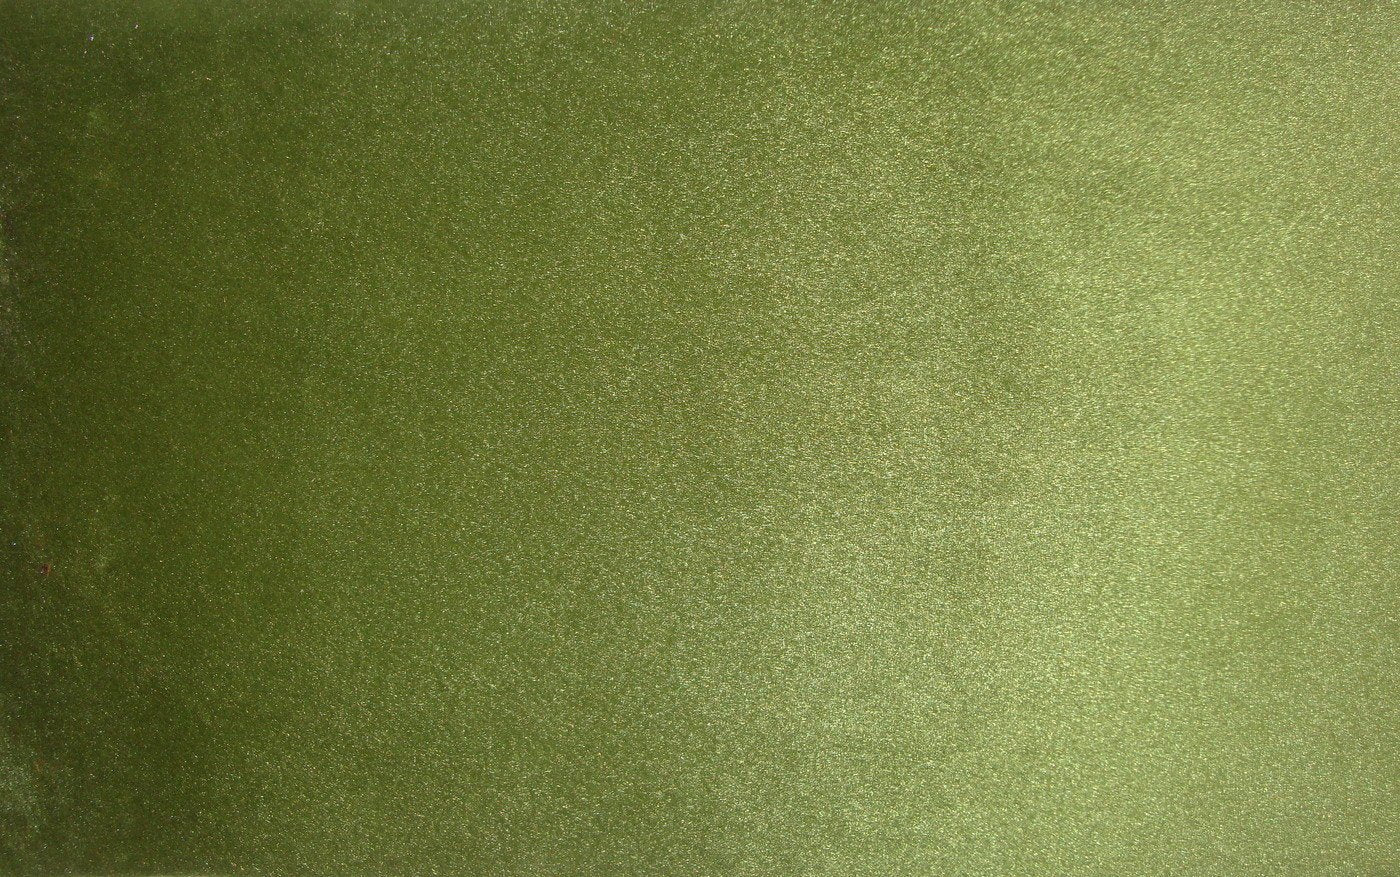 apple-green-velboa-faux-fur-60-inch-wide-upholstery-fabric-by-the-yard